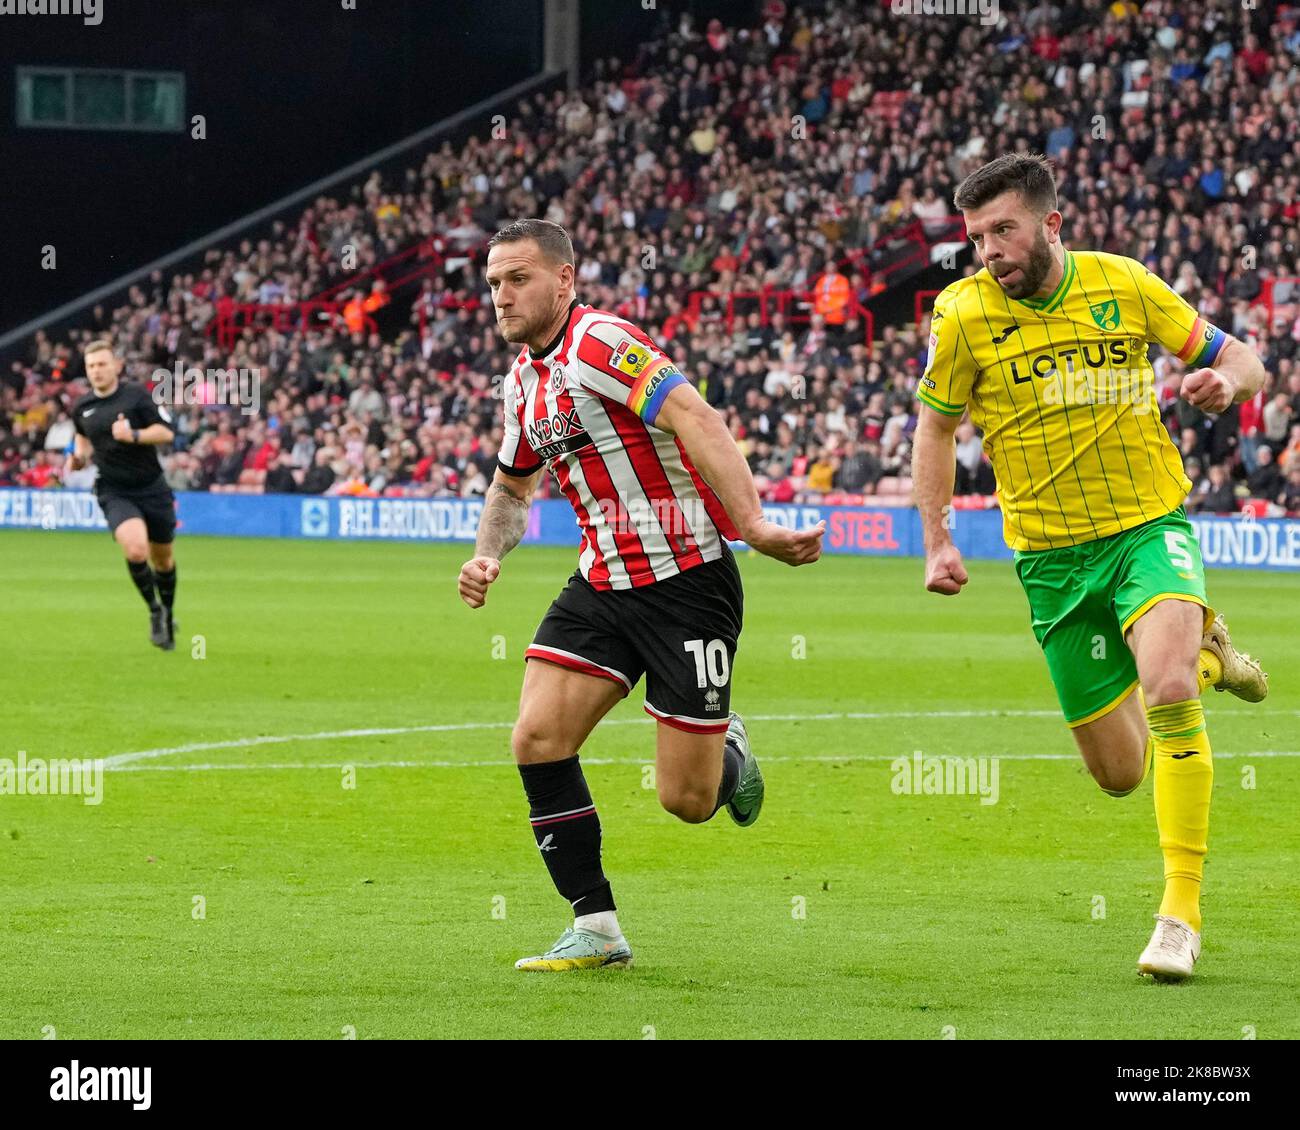 Grant Hanley #5 of Norwich City and Billy Sharp #10 of Sheffield United chase a loose ball during the Sky Bet Championship match Sheffield United vs Norwich City at Bramall Lane, Sheffield, United Kingdom, 22nd October 2022  (Photo by Steve Flynn/News Images) Stock Photo